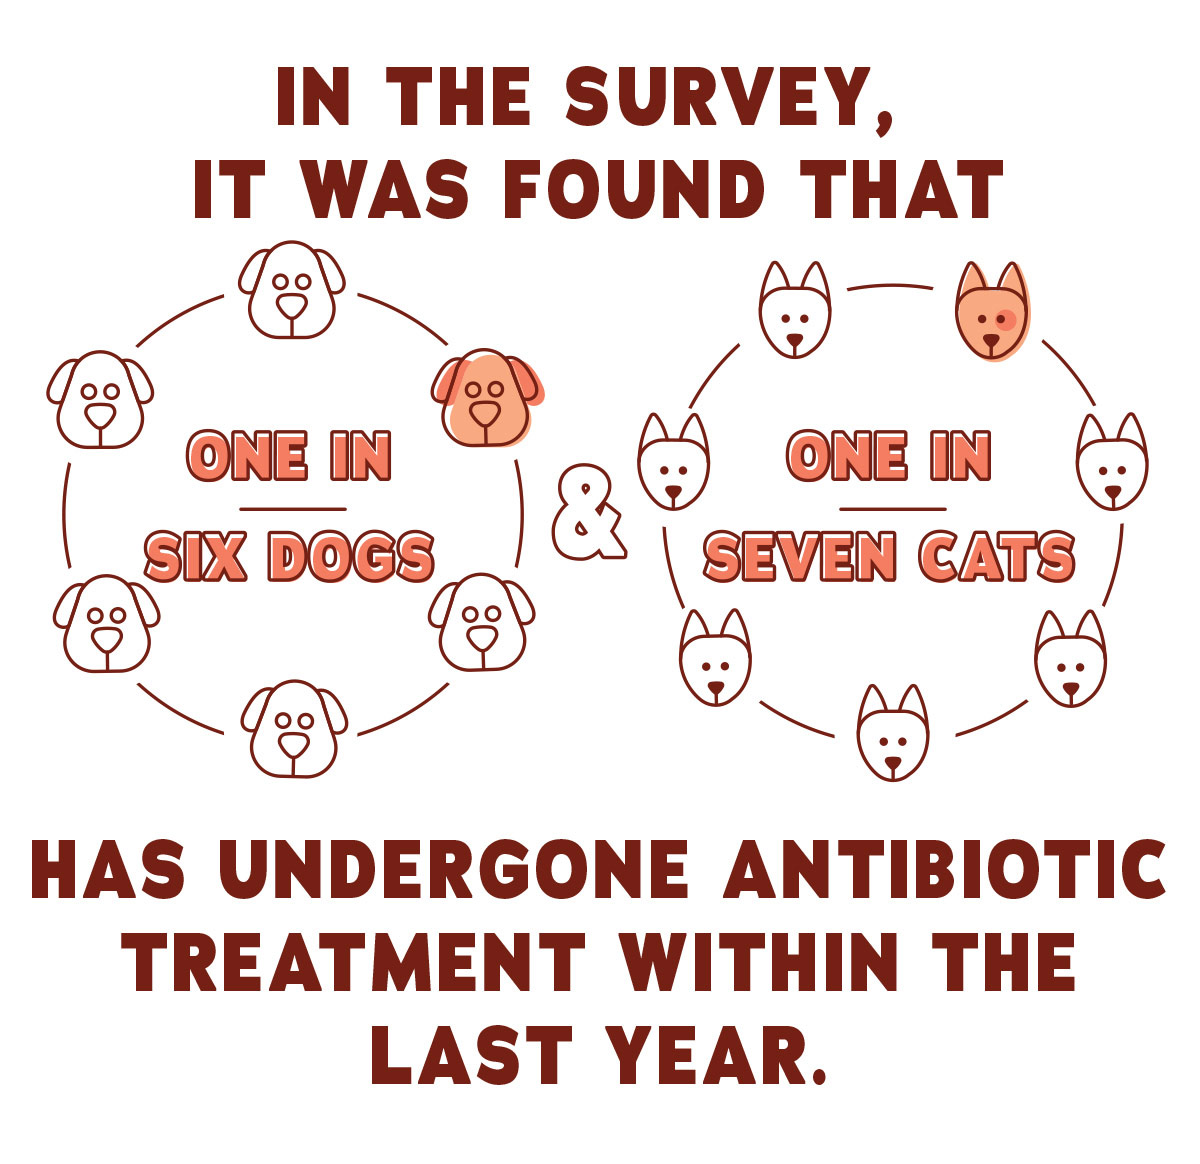 In the survey, it was found that one in six dogs and one in seven cats has undergone antibiotic treatment within the last year.